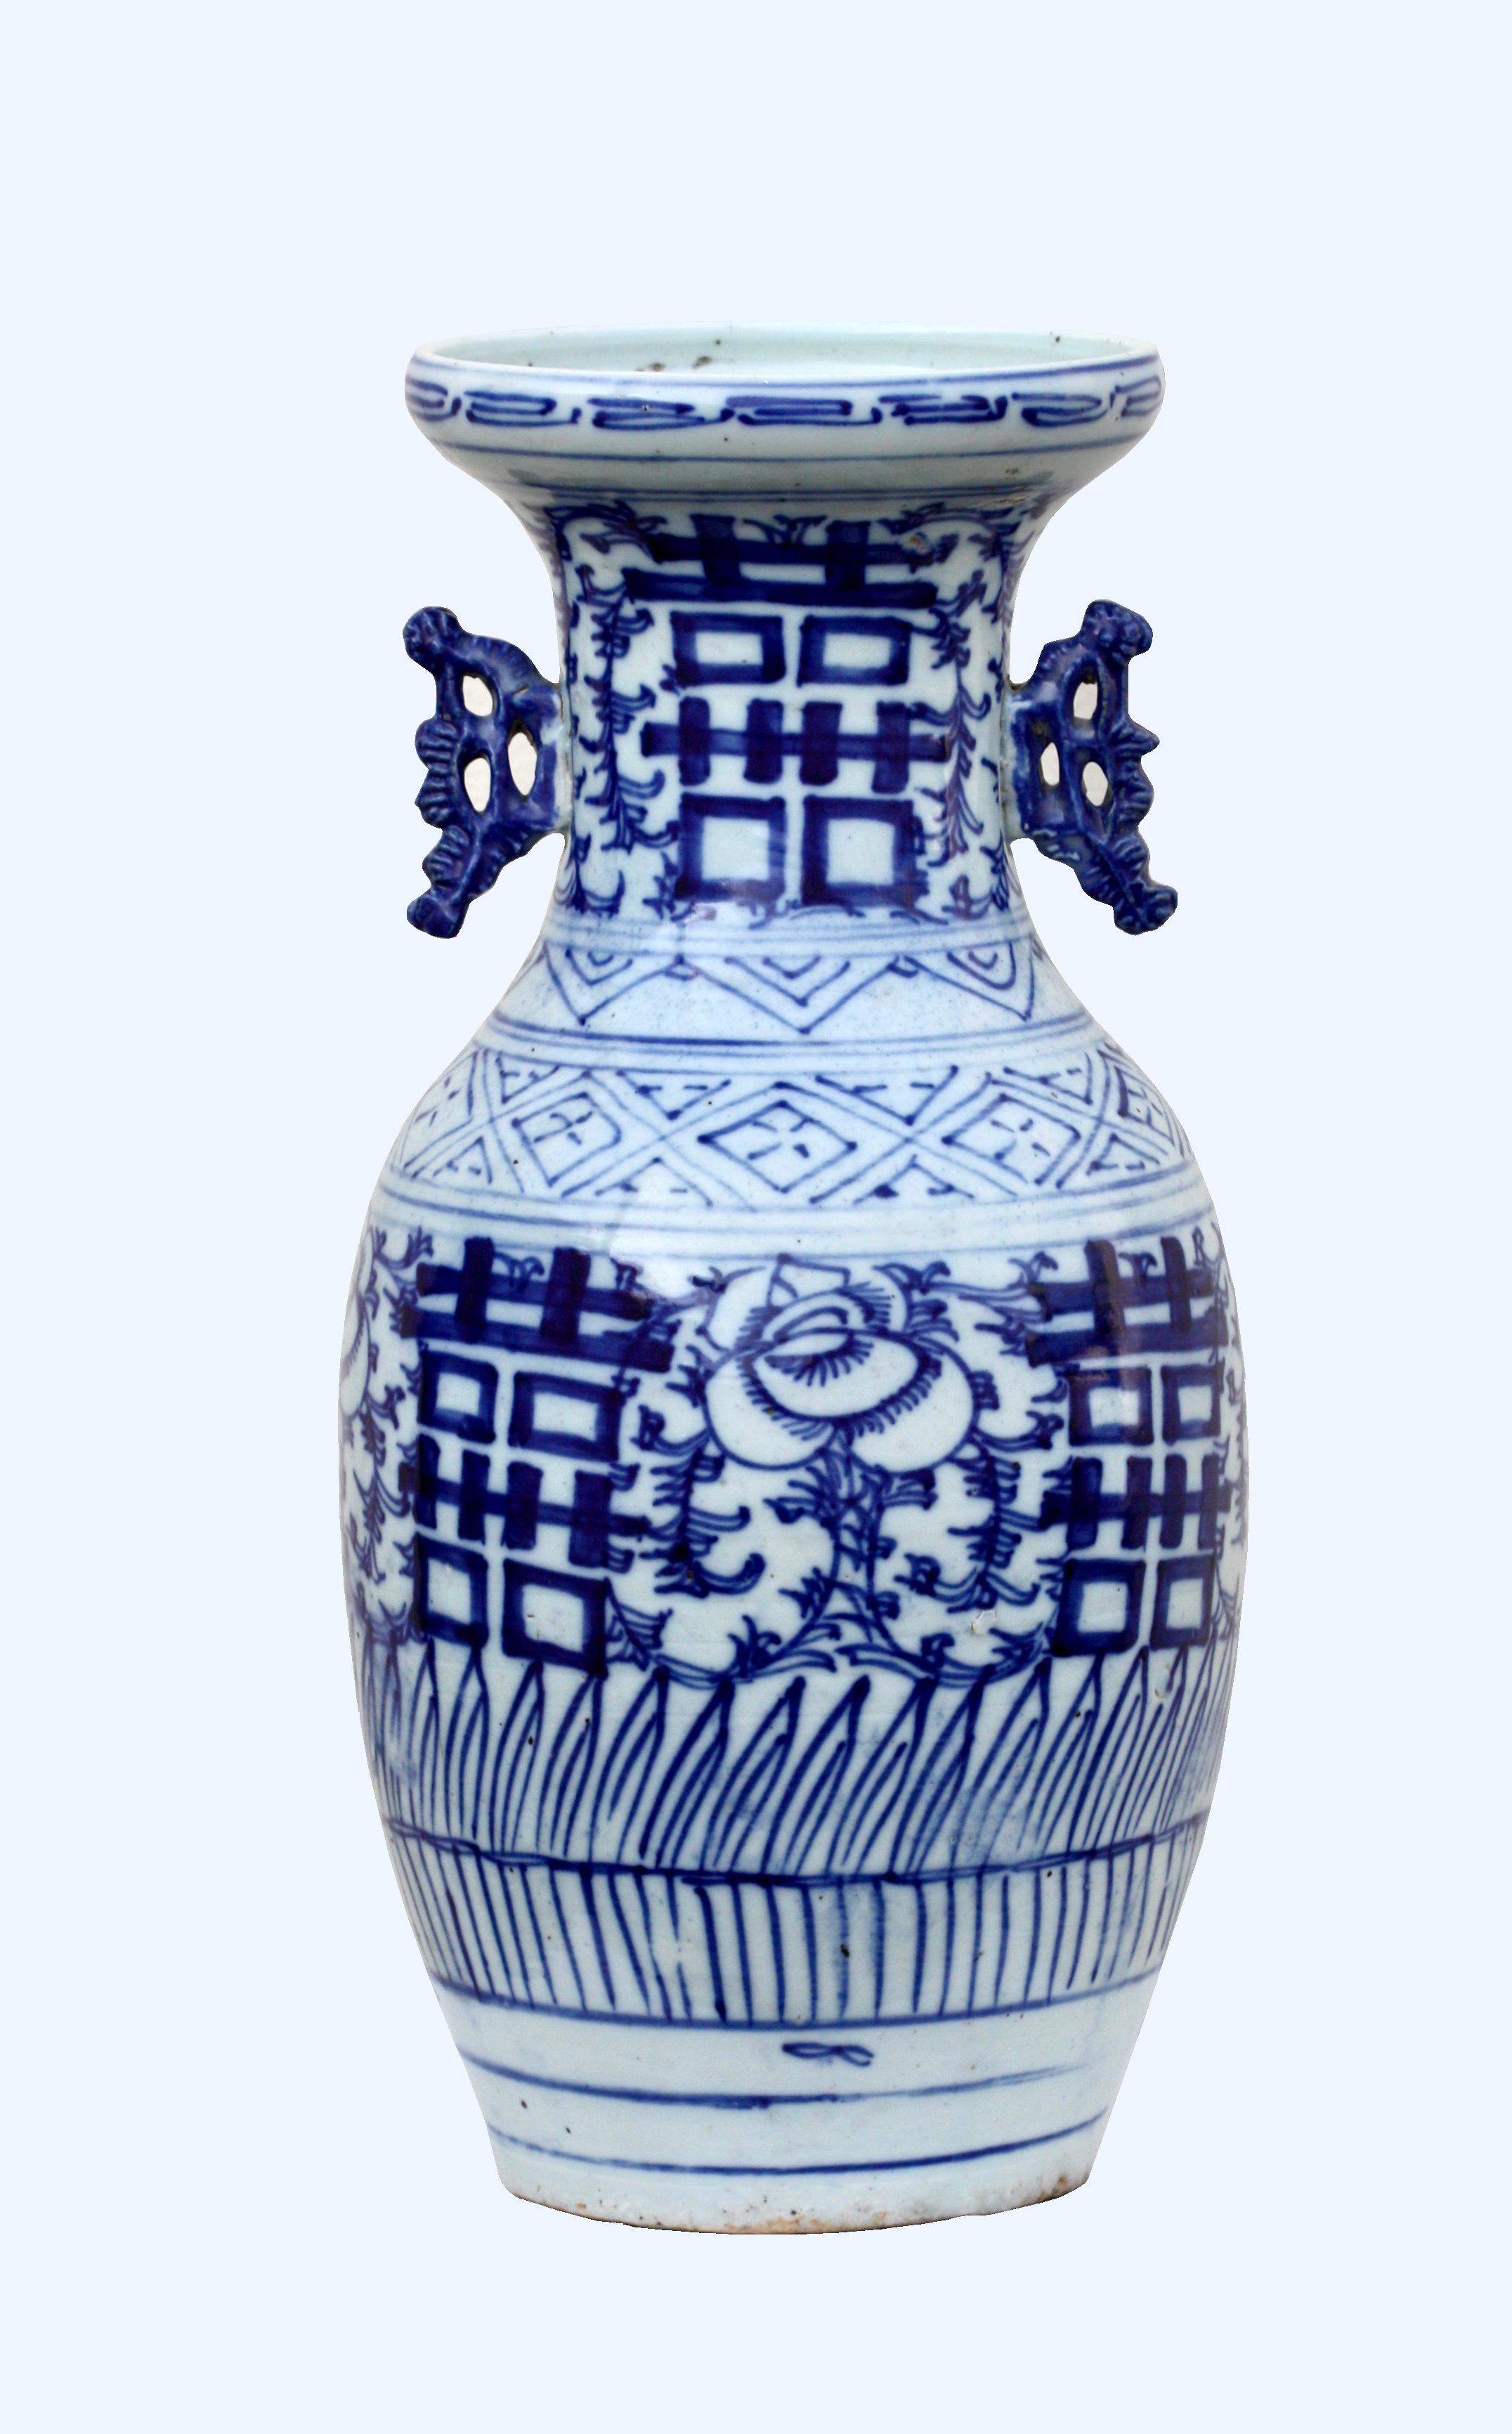 Chinese blue and white porcelain vase
Of baluster form, decorated with floral patterns, flanked by leaf formed handles.
Measure: Height 16 in. (40.64 cm.)